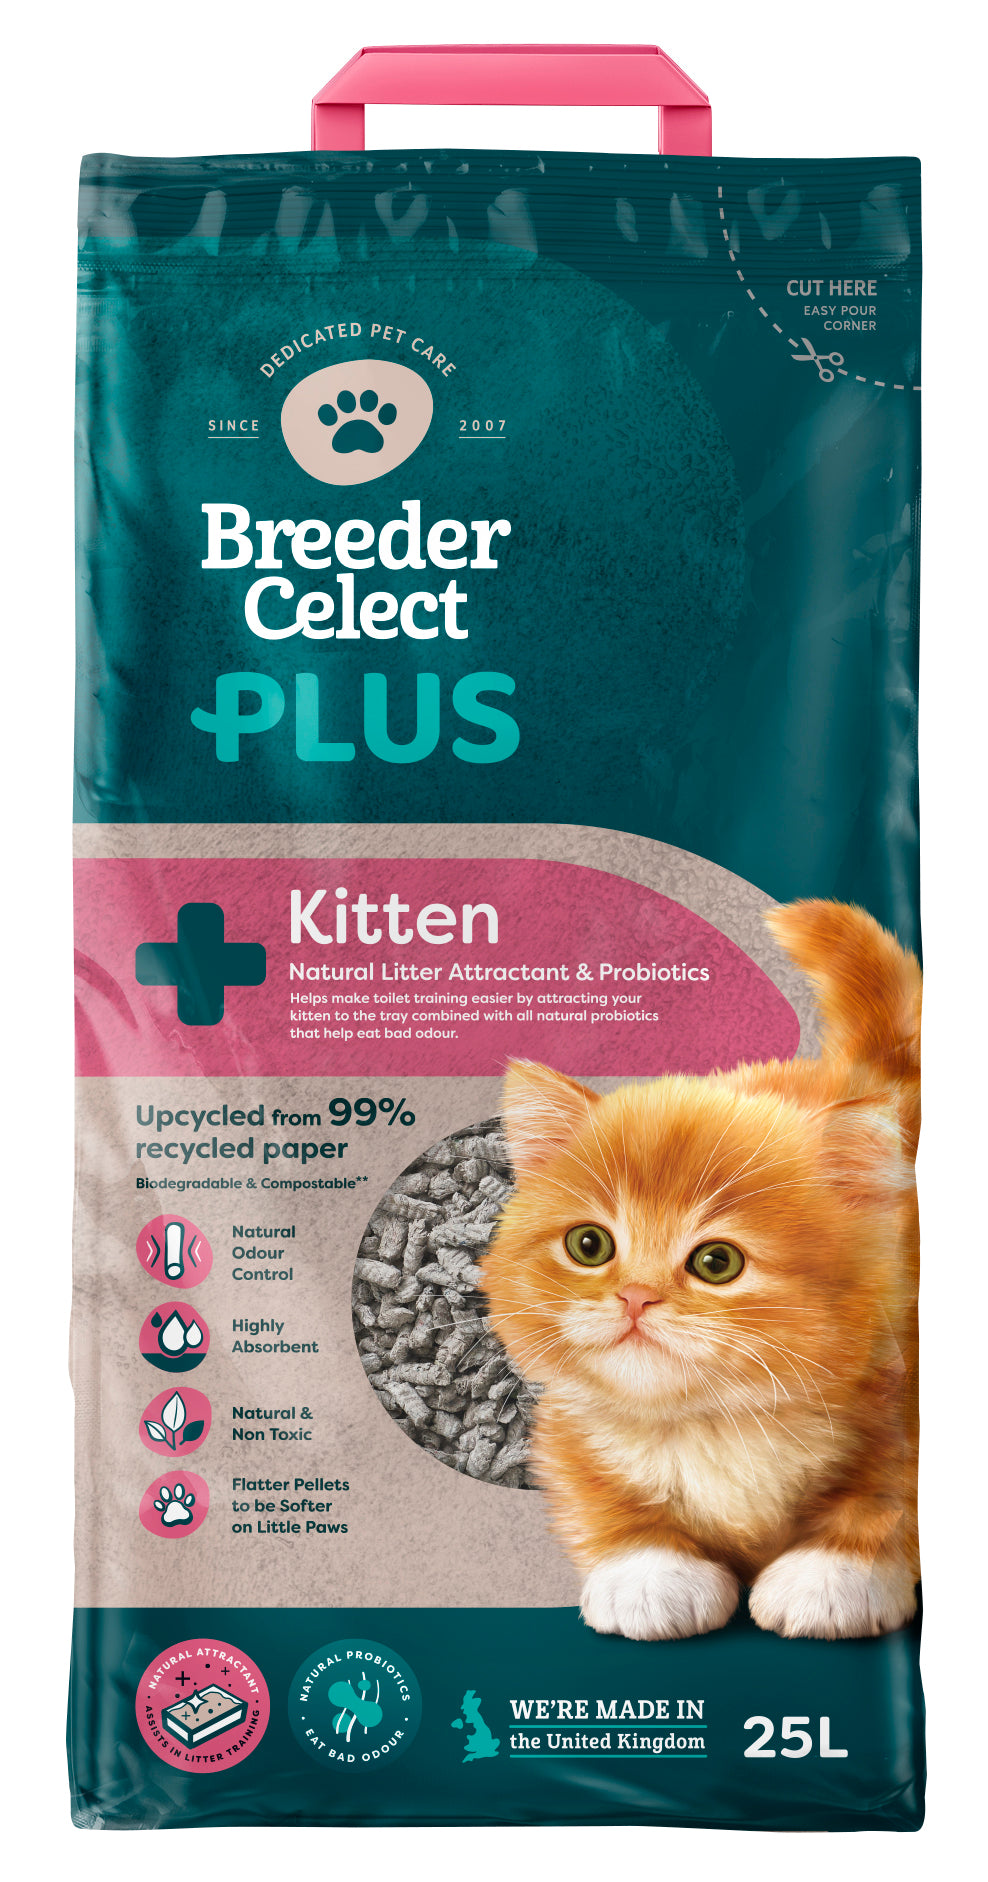 Breeder Celect Recycled Paper PLUS Kitten 25L